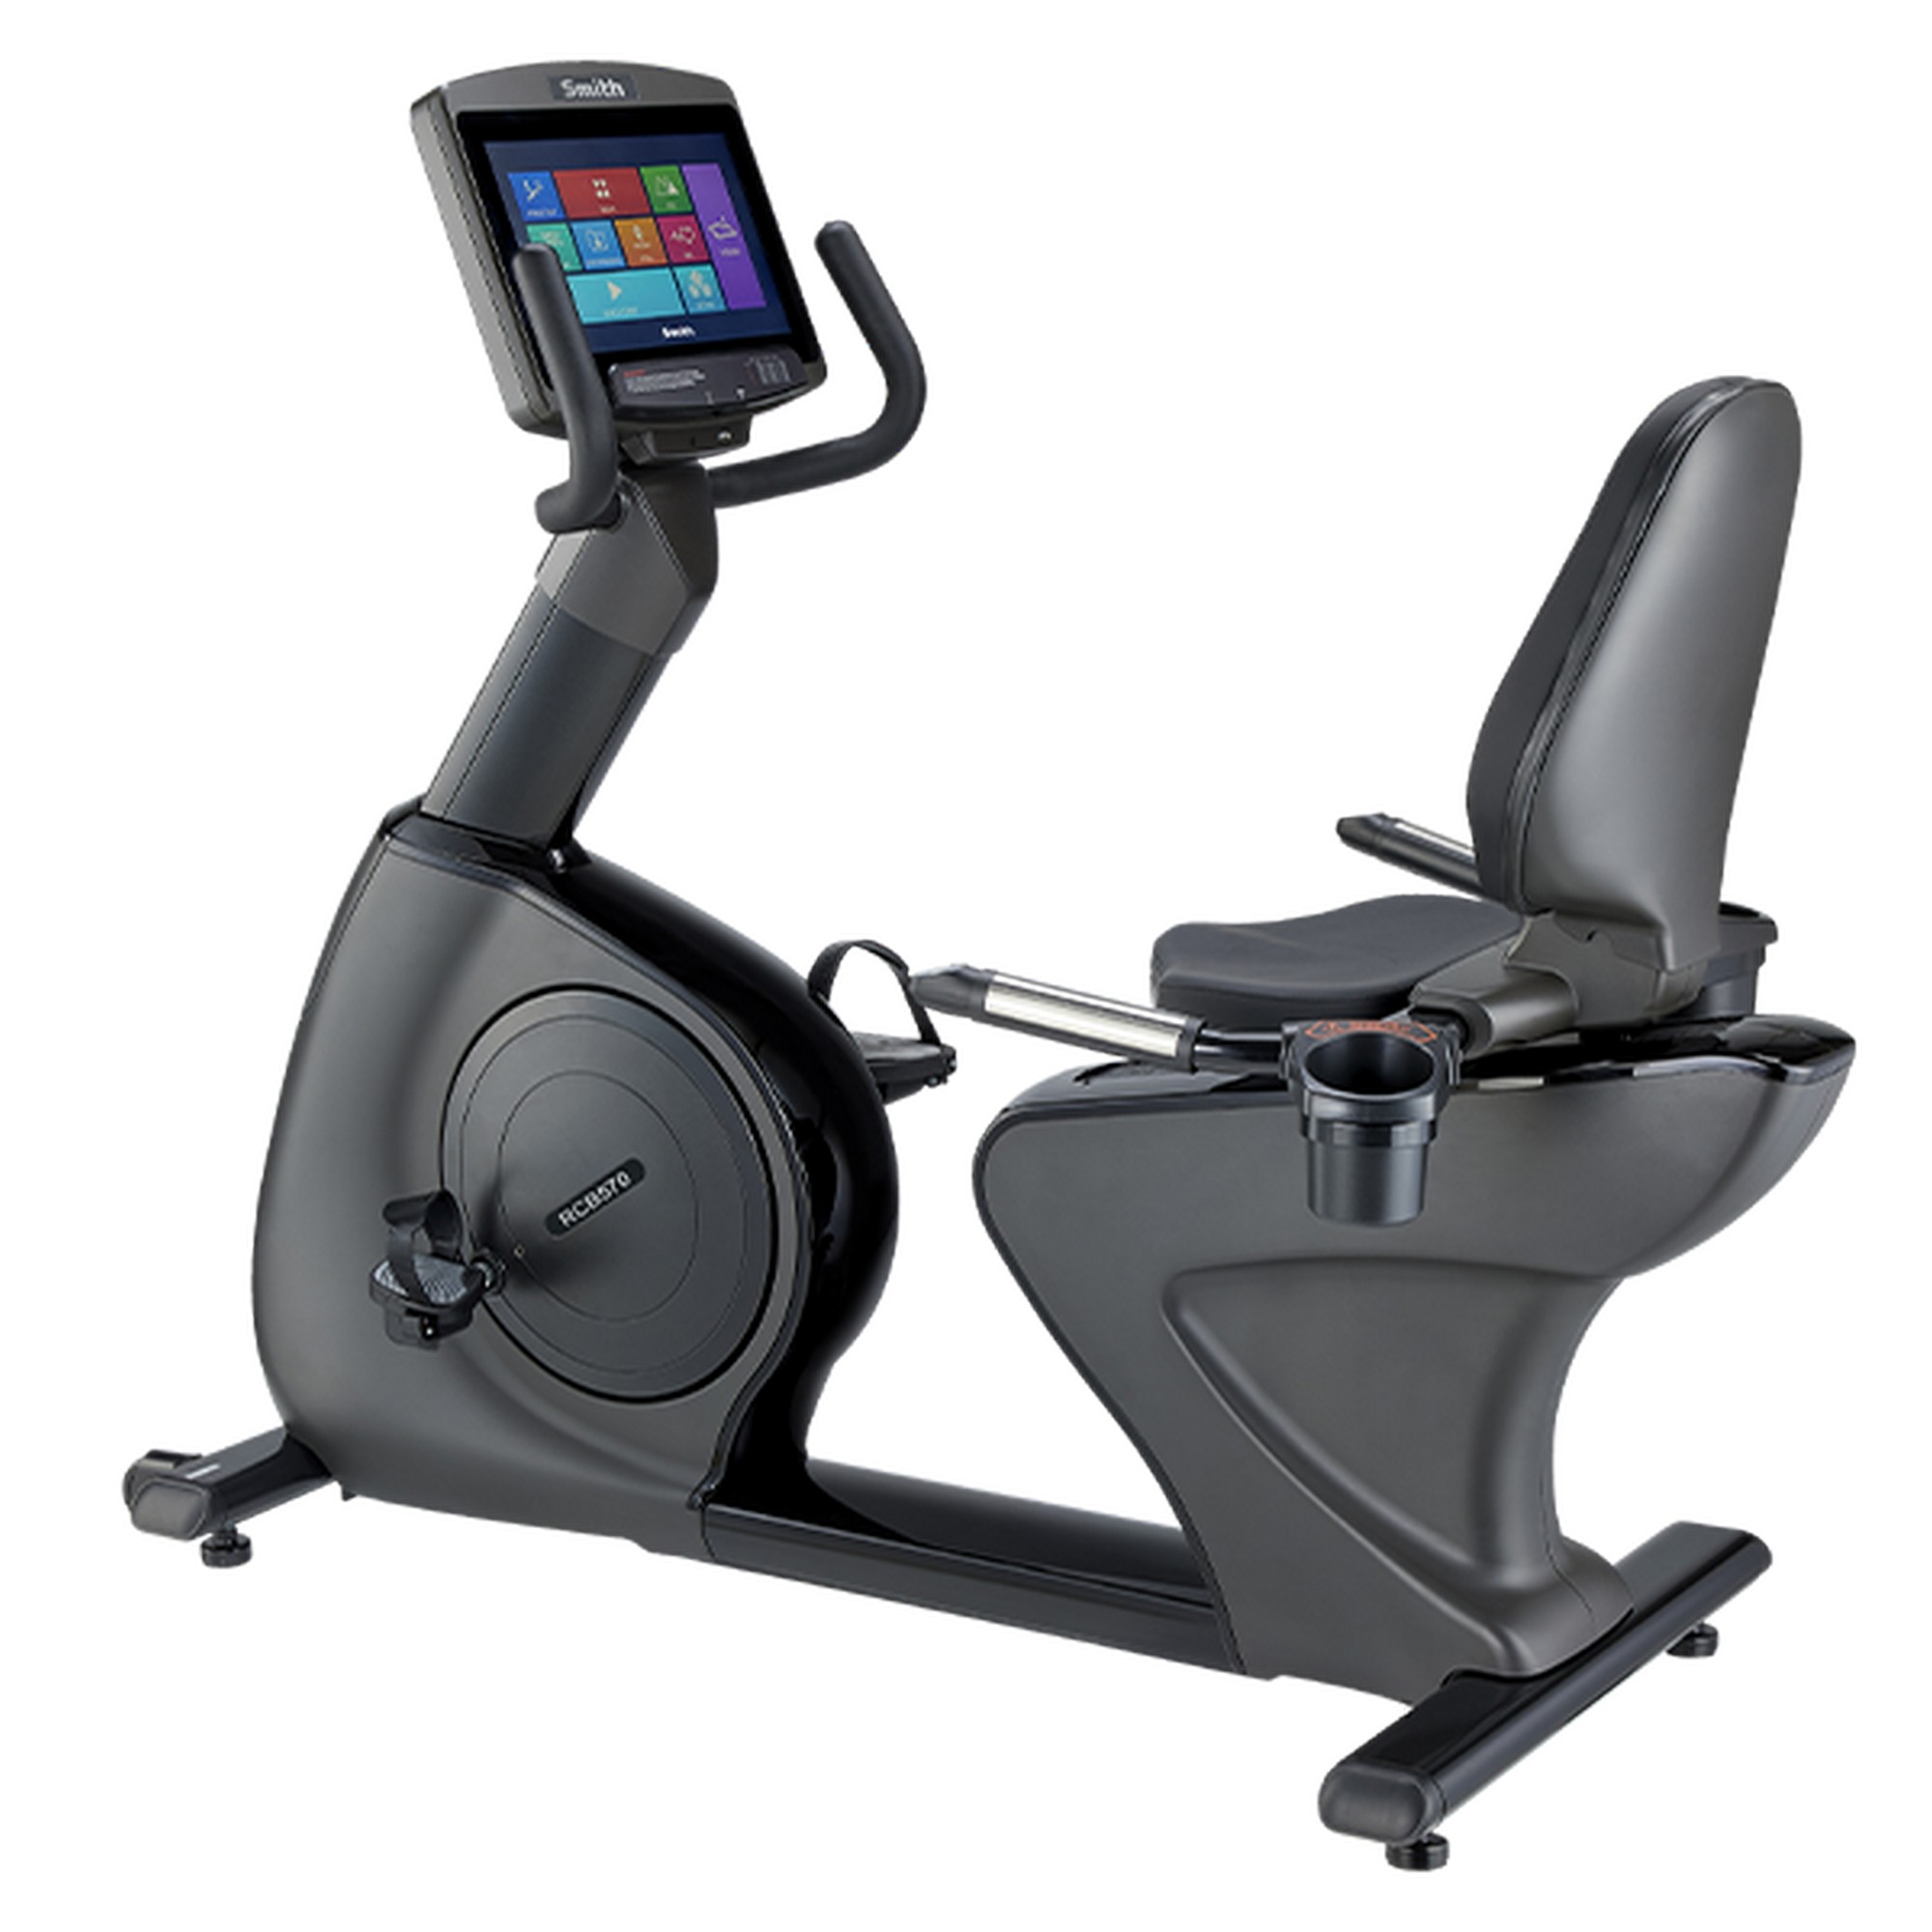   Smith Fitness RCB570